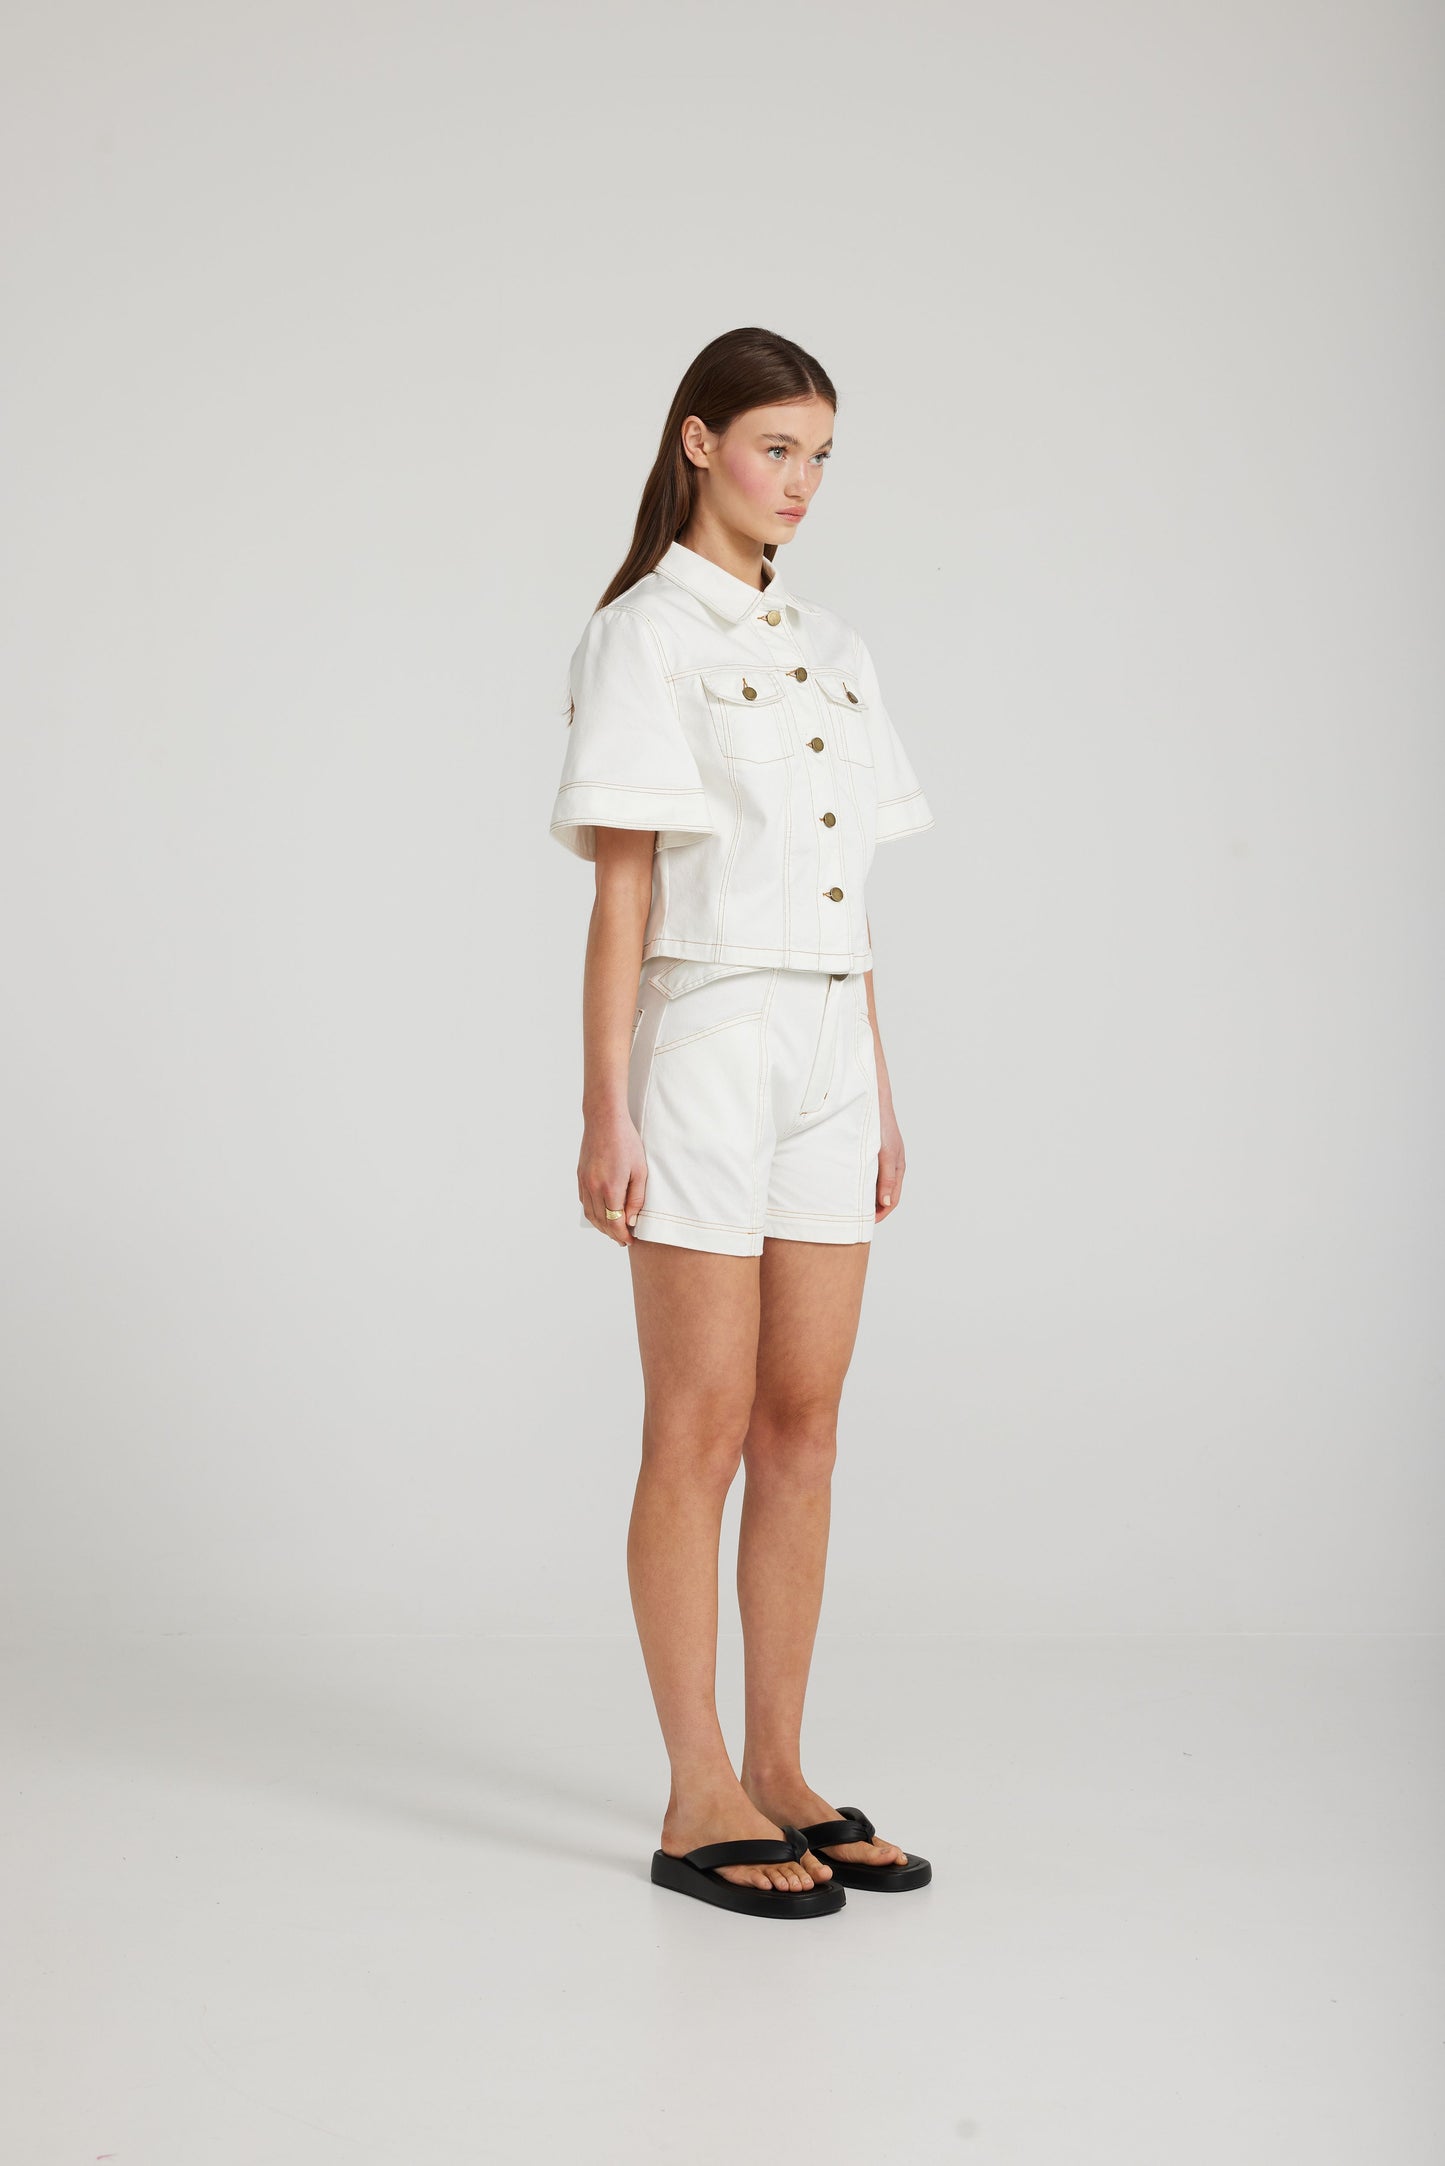 Defender Shorts in White Denim by Daisy Says